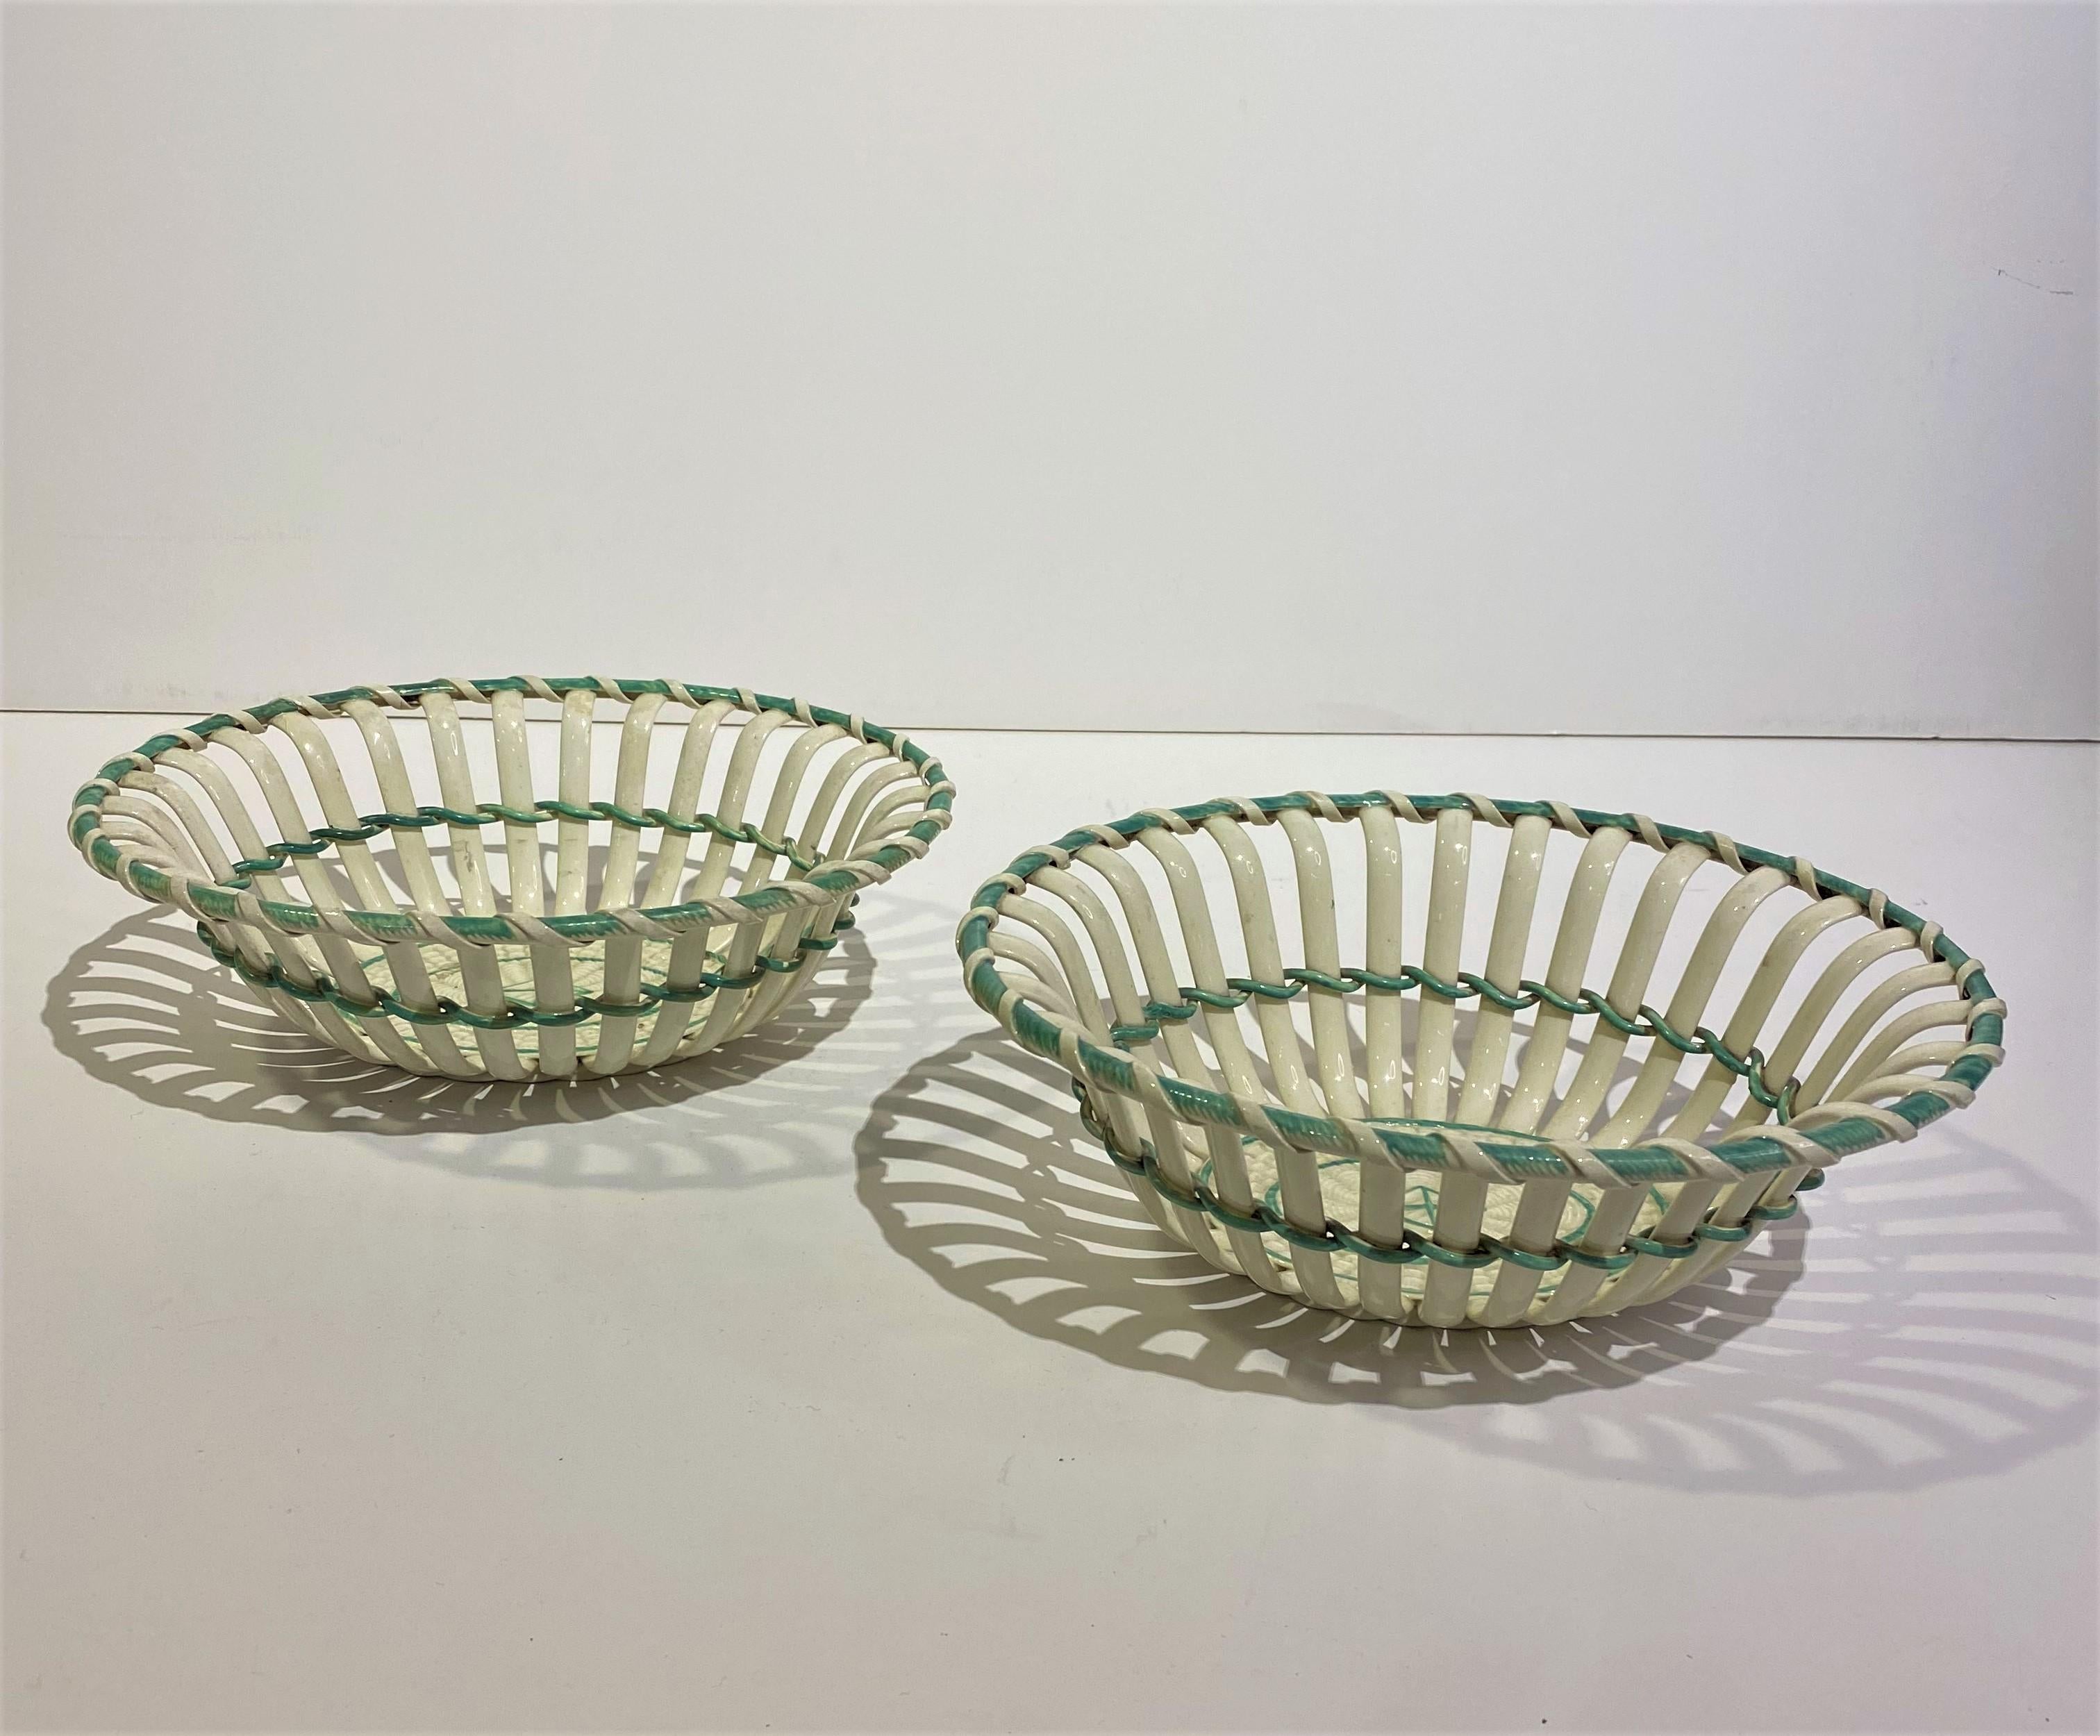 A fine pair of 19th-century creamware bi-color pierced baskets represents a pinnacle of ceramic craftsmanship during this period. Creamware, a type of refined earthenware, gained popularity in the 18th century and continued to be appreciated into